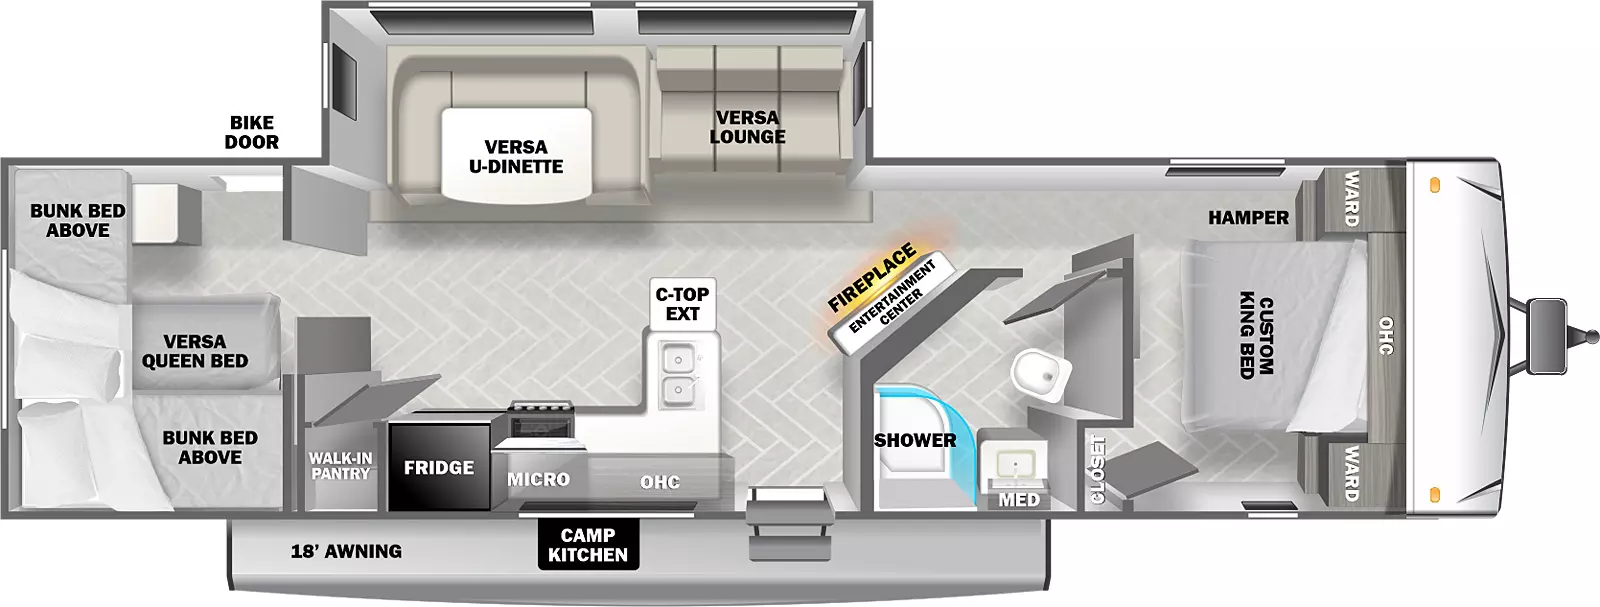 The 29VBUD has one slide out on the off-door side, one entry door on the door side, exterior camp kitchen, and an 18' awning. Interior layout from front to back: front bedroom containing foot facing queen bed, hamper, closet, overhead cabinet, and wardrobes on either side of the bed; side aisle bathroom with shower, toilet, sink, and medicine cabinet on the door side; entertainment center with fireplace below across from the off-door side slideout with Versa Lounge; entry door kitchen sink, overhead cabinets, microwave, stove, refrigerator and walk-in pantry on the door side; rear bunkhouse with bunk beds above, versa queen bed below and a bike door access on the off-door side. 